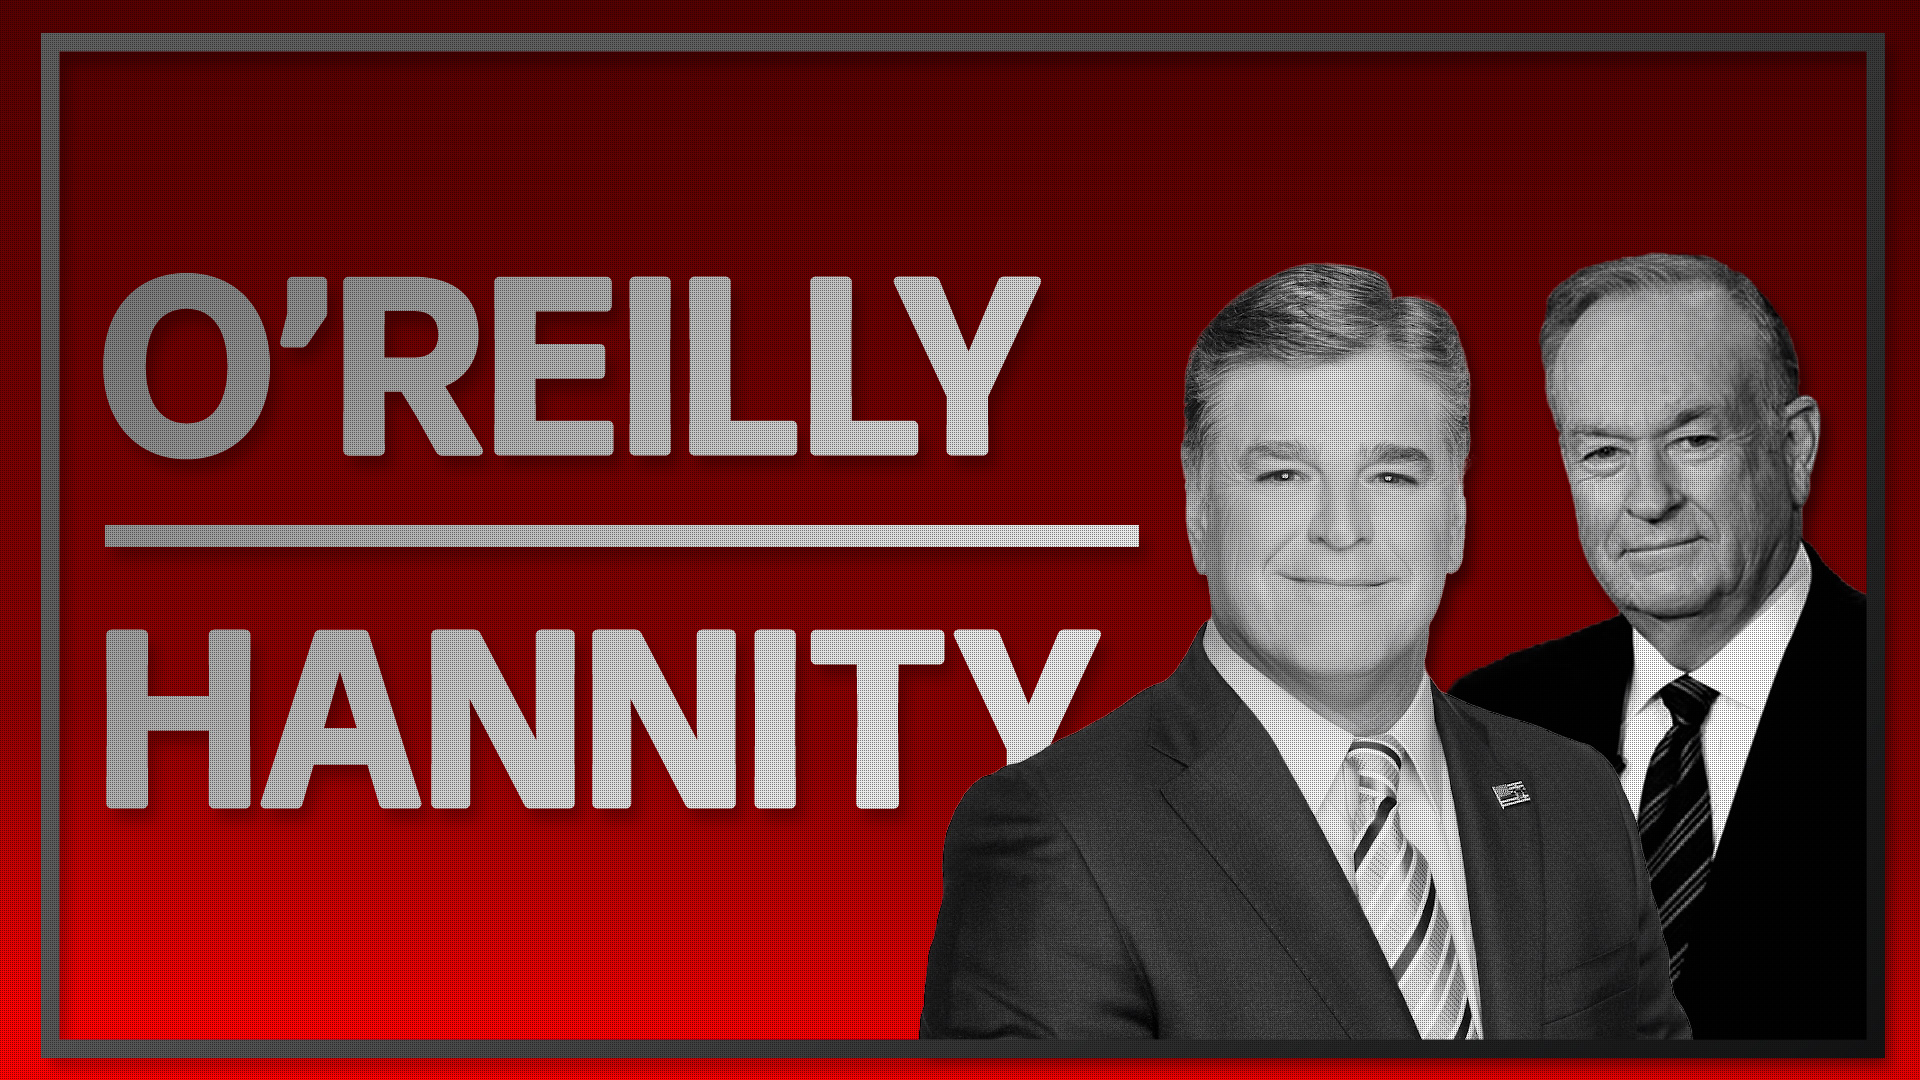 Listen: O'Reilly and Hannity on the Insane Protest Approach